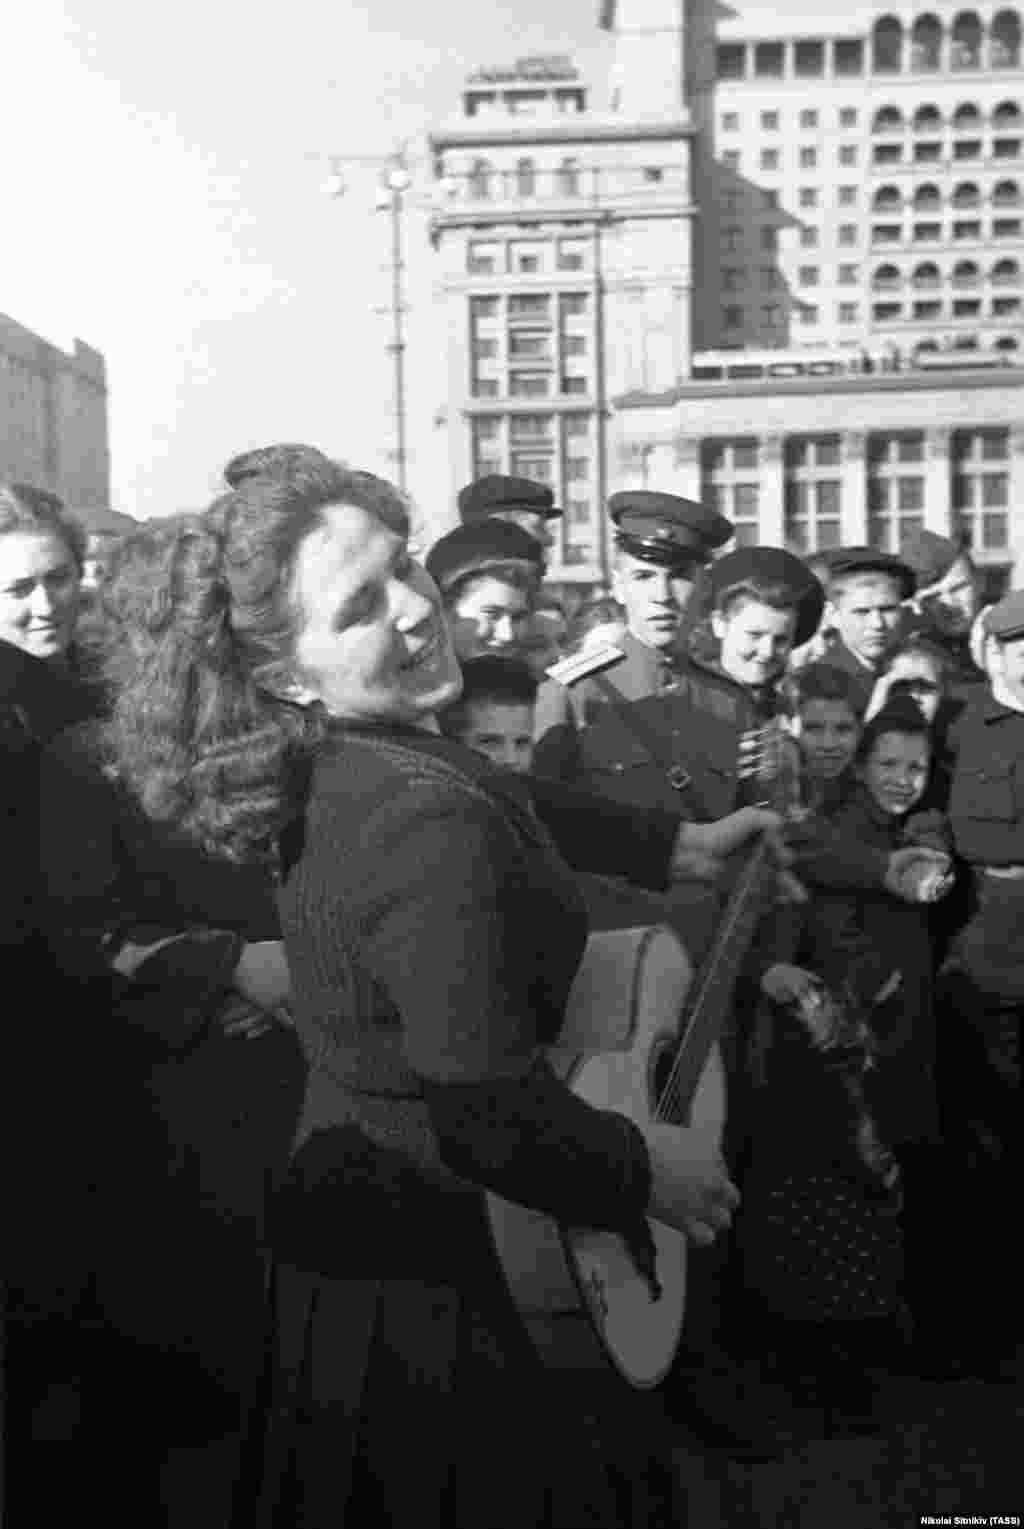 A woman breaks into song in central Moscow. In the Soviet Union, the party got started in earnest on May 9.